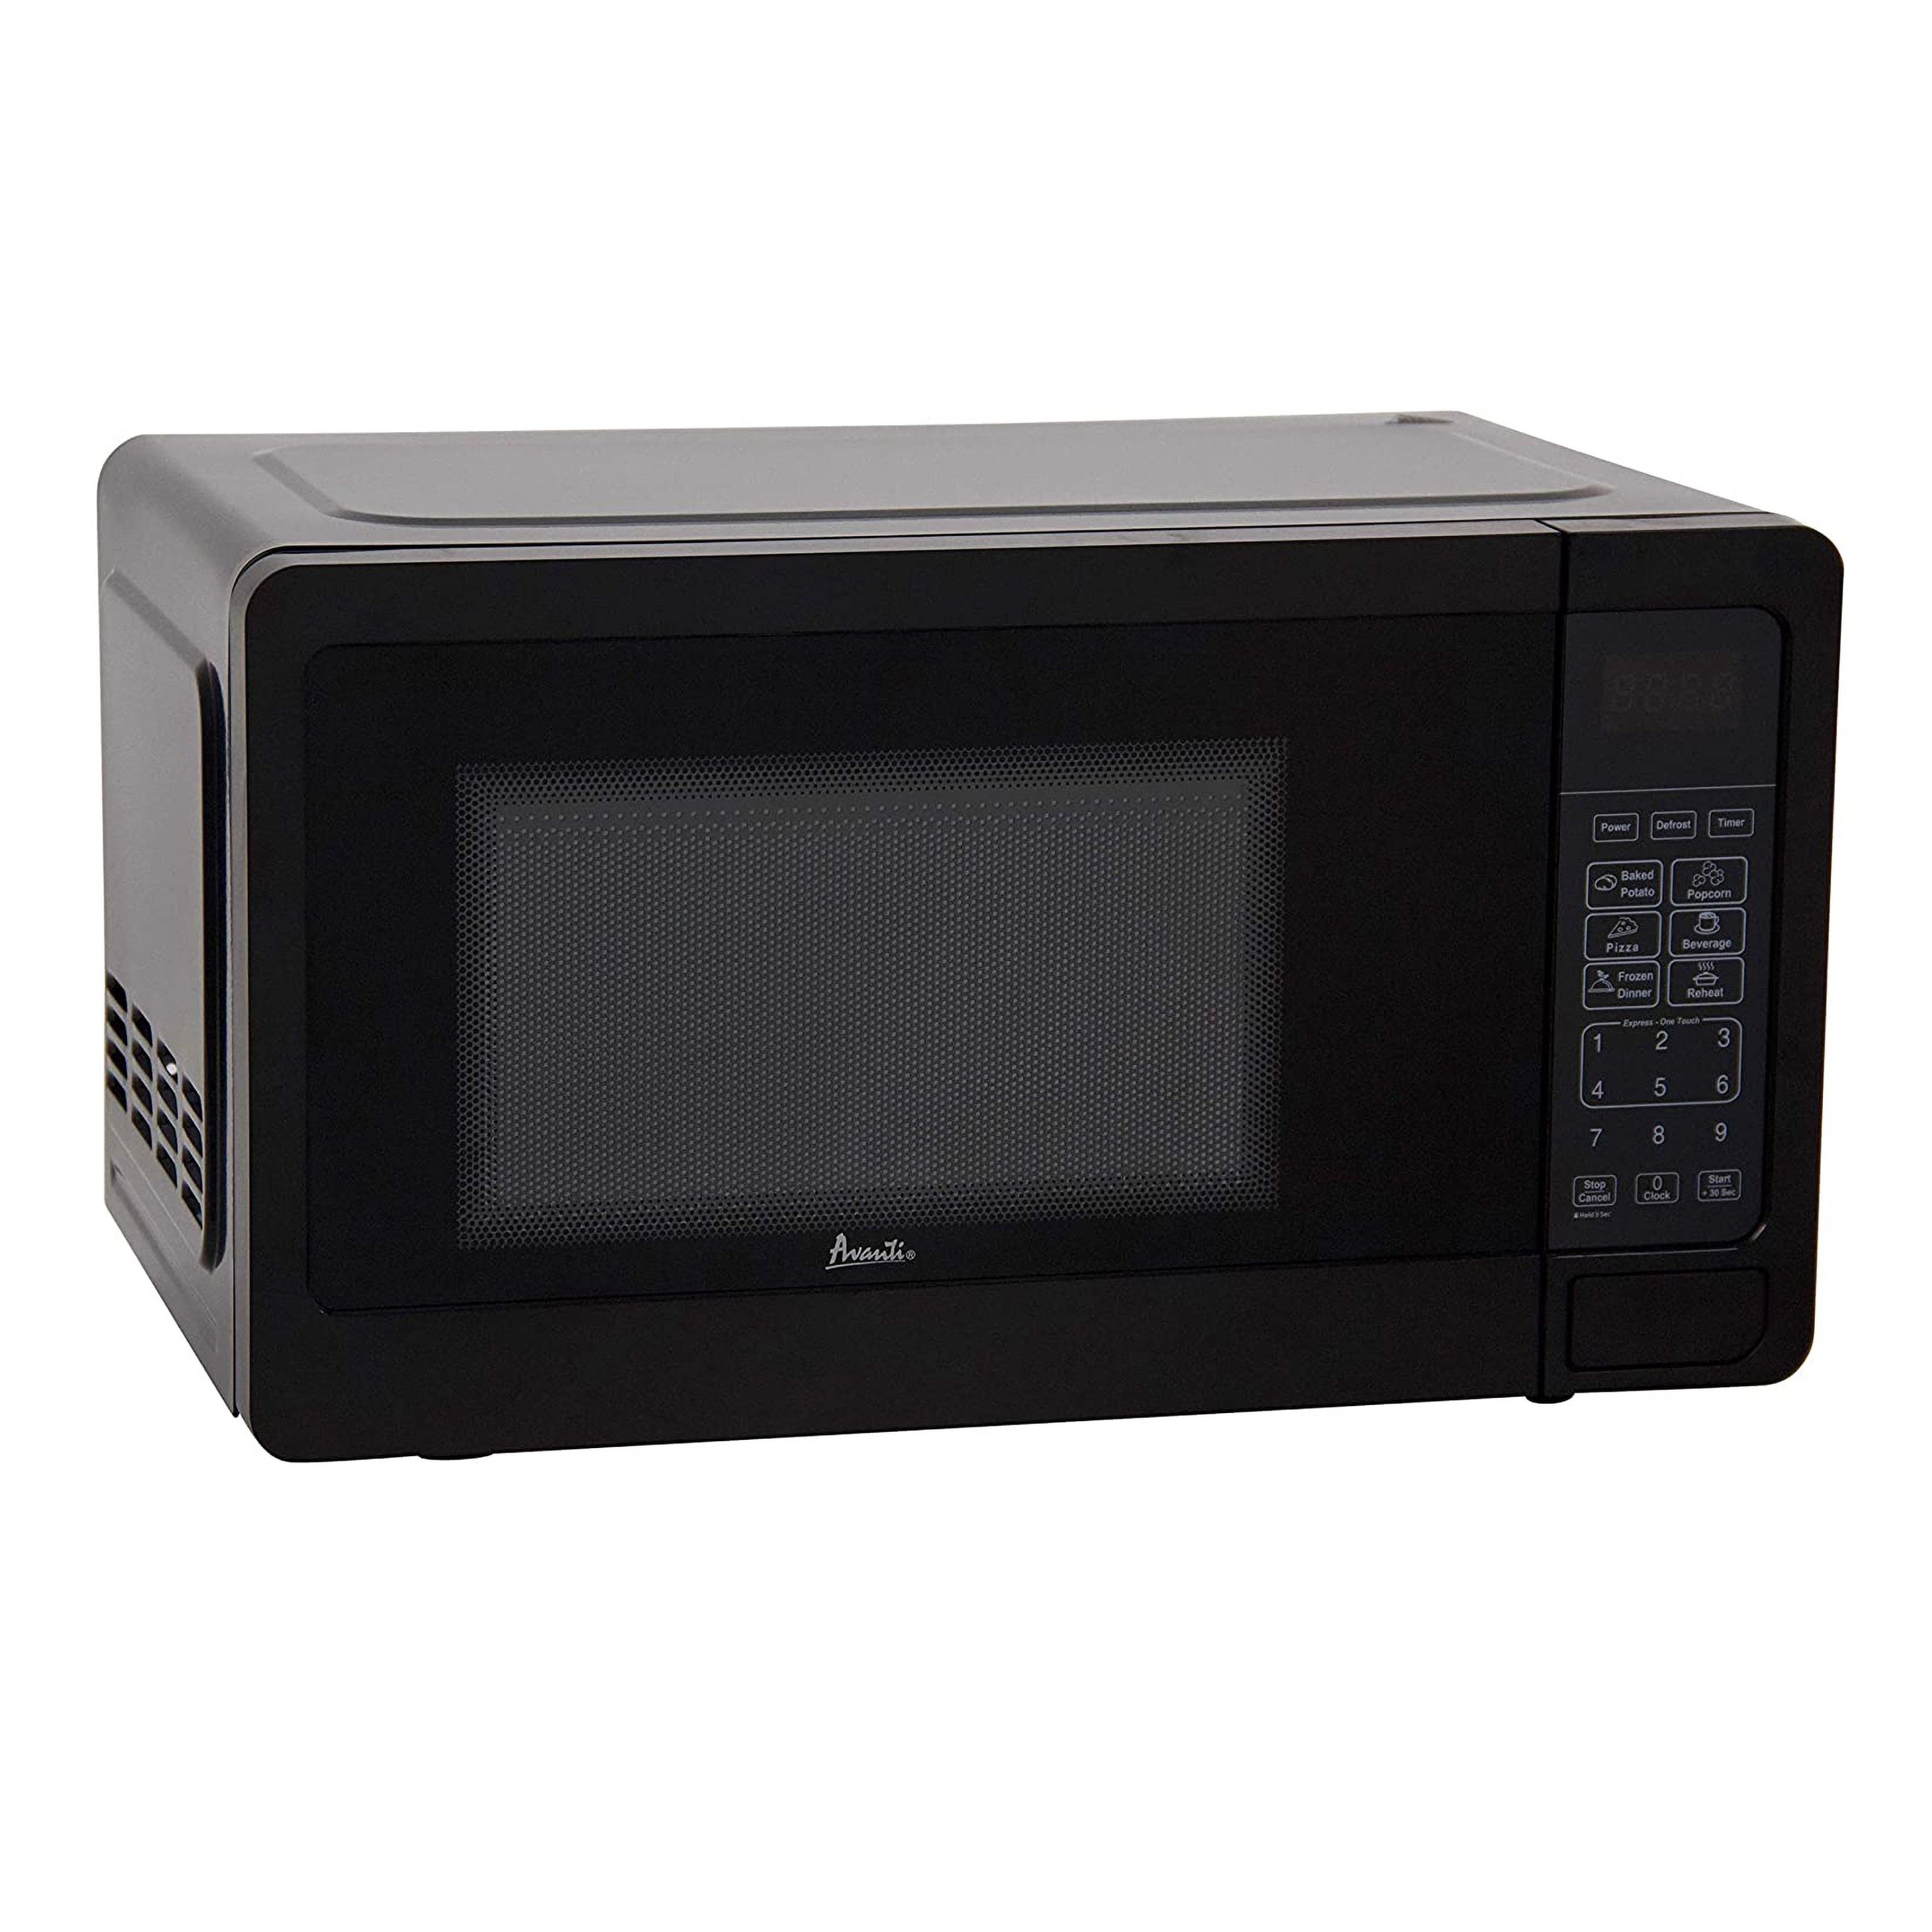 0.7 Cubic Foot 700W Micorwave Oven Black